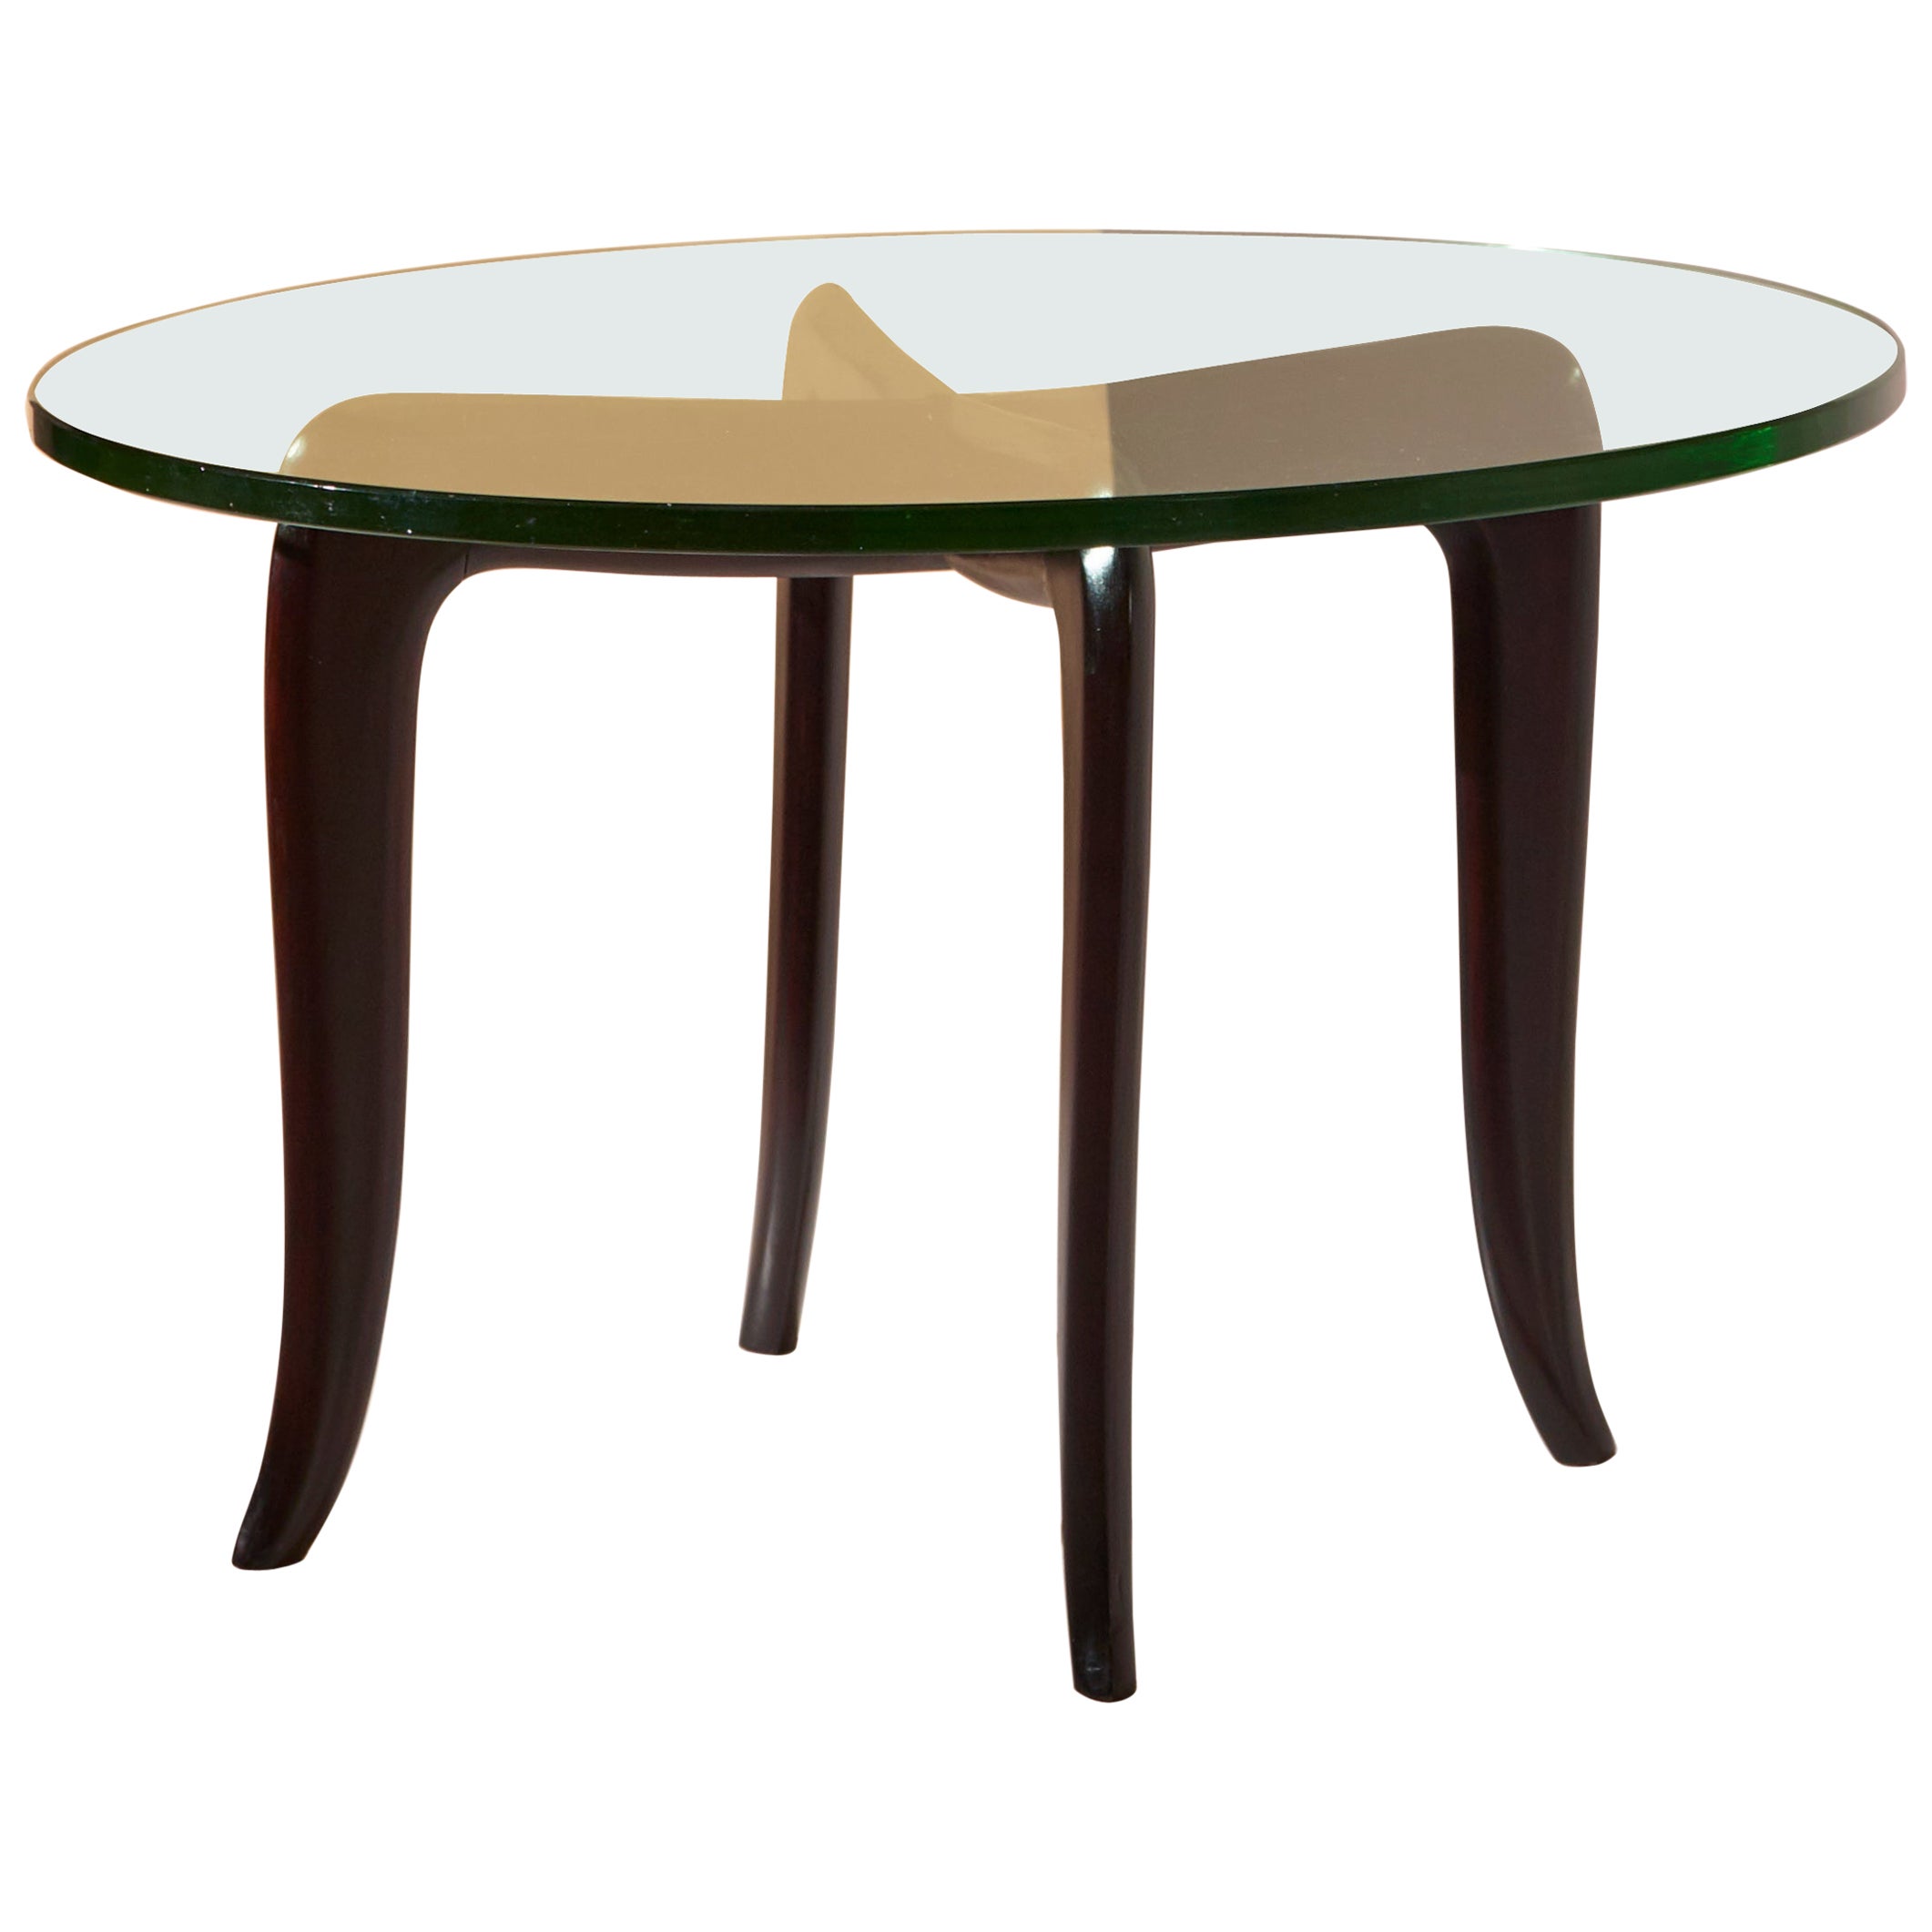 Guglielmo Ulrich coffee table made of lacquered wood and glass, Italy, 1940s For Sale